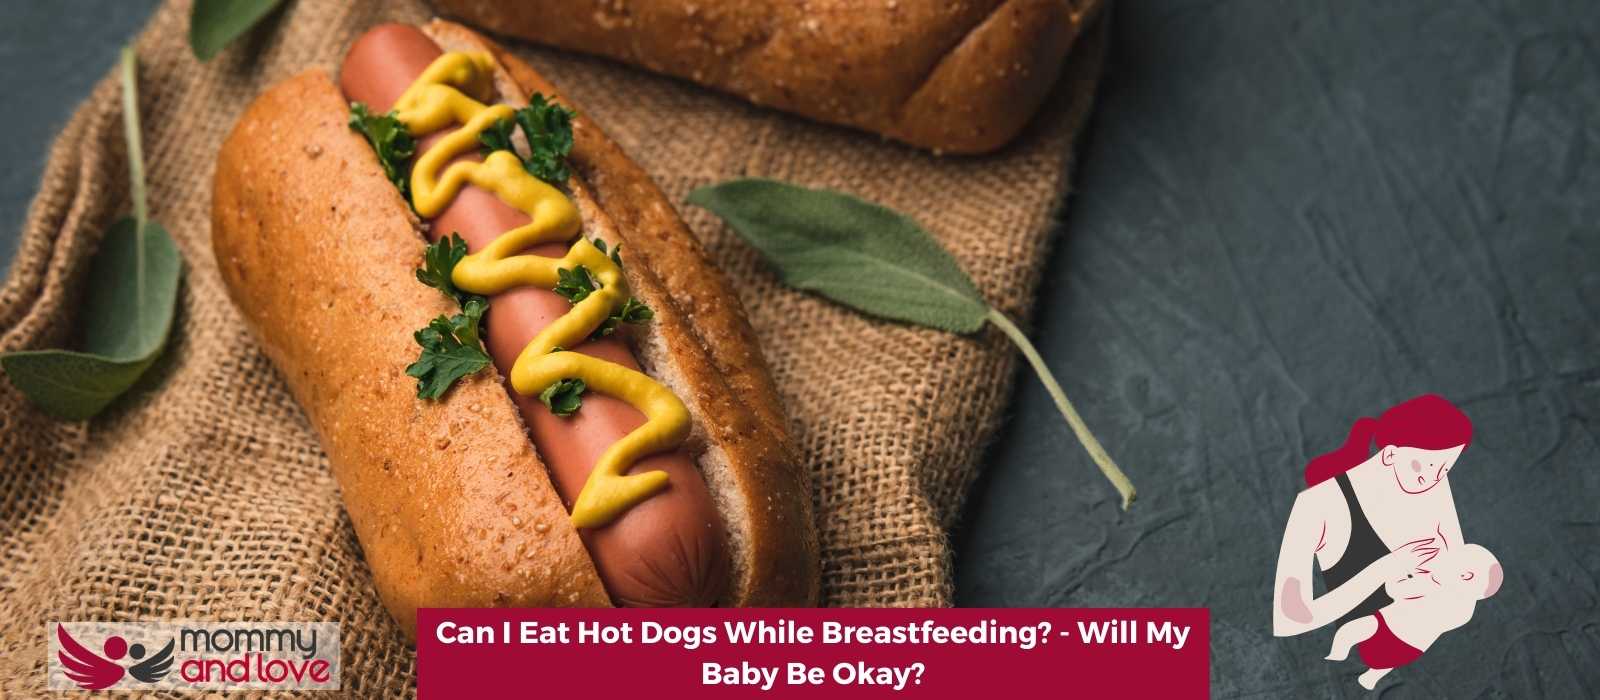 Can I Eat Hot Dogs While Breastfeeding - Will My Baby Be Okay